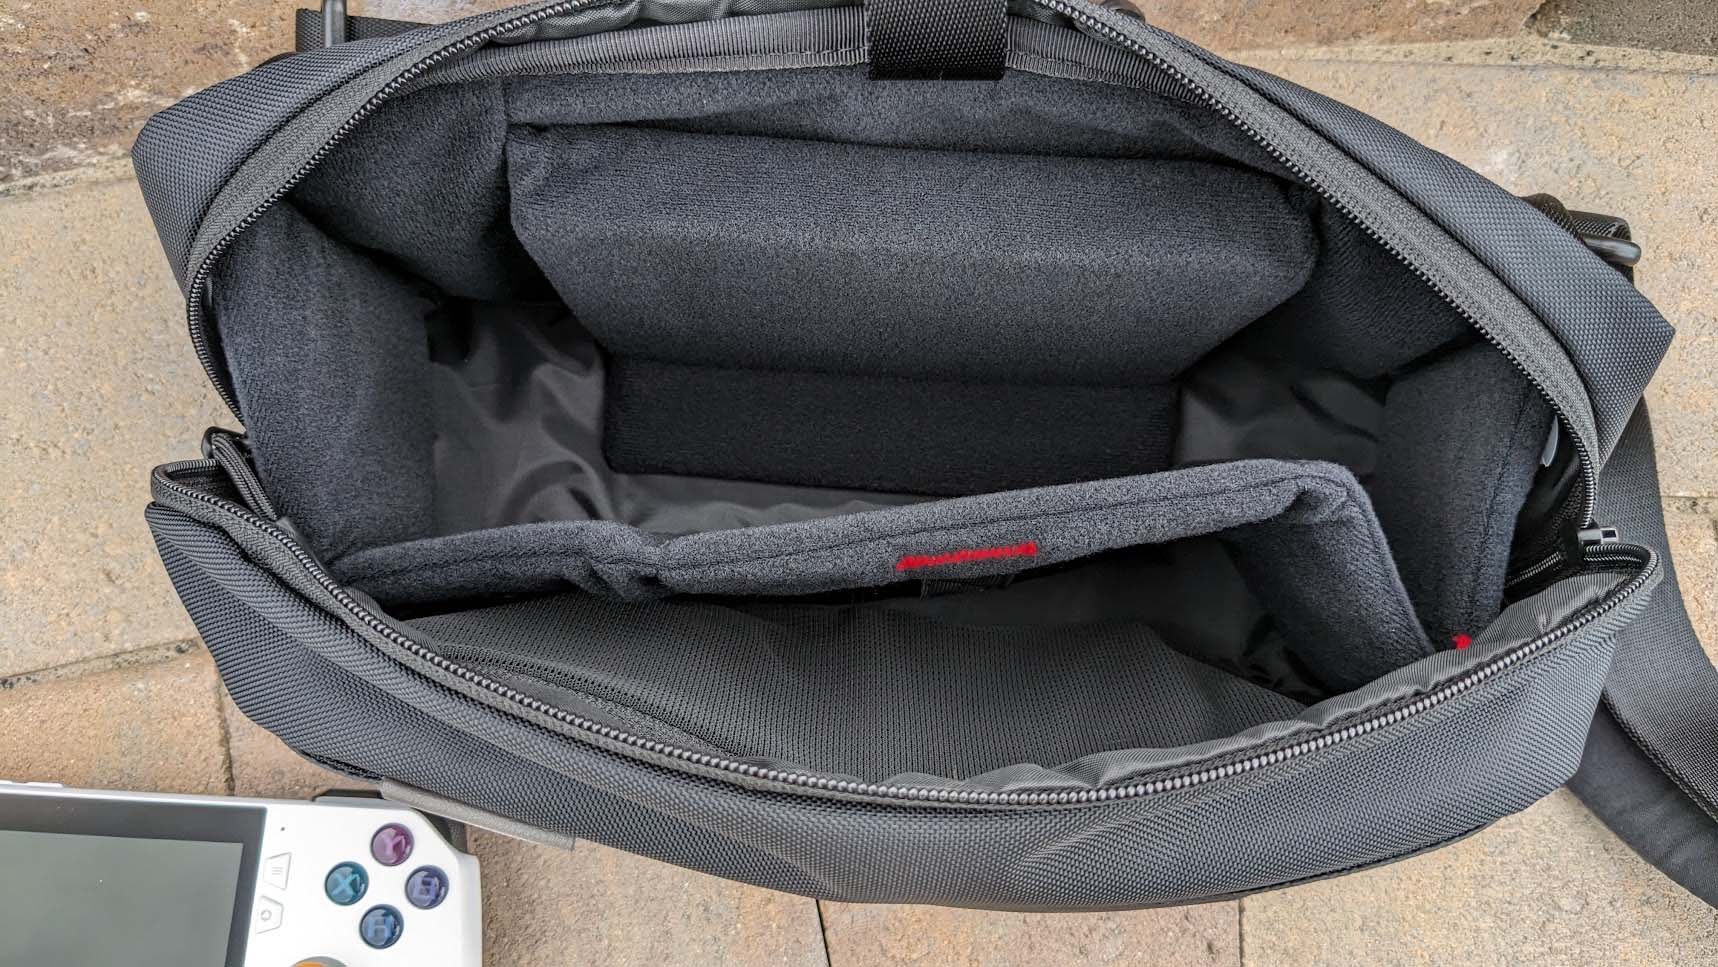 Tomtoc Arccos-G47 Travel Bag review: Great for ROG…